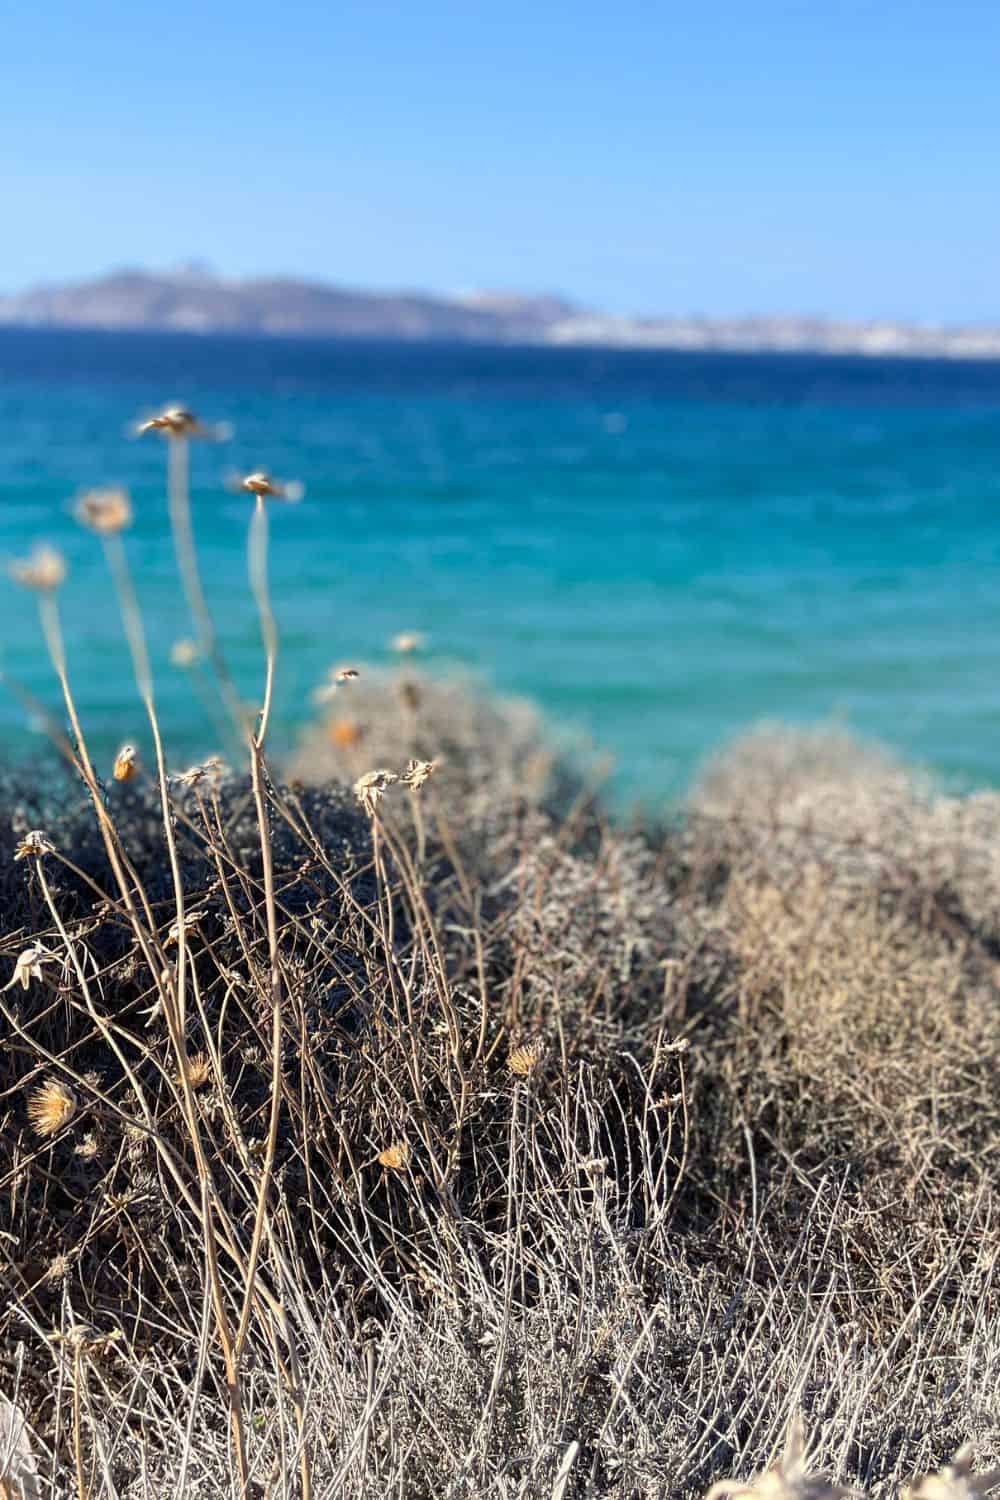 This image features a close-up of dry, wild plants in the foreground with a blurred background of the vibrant blue sea. The focus on the plants, along with the blurred seascape, gives a sense of being present in the natural, rugged terrain of Milos.